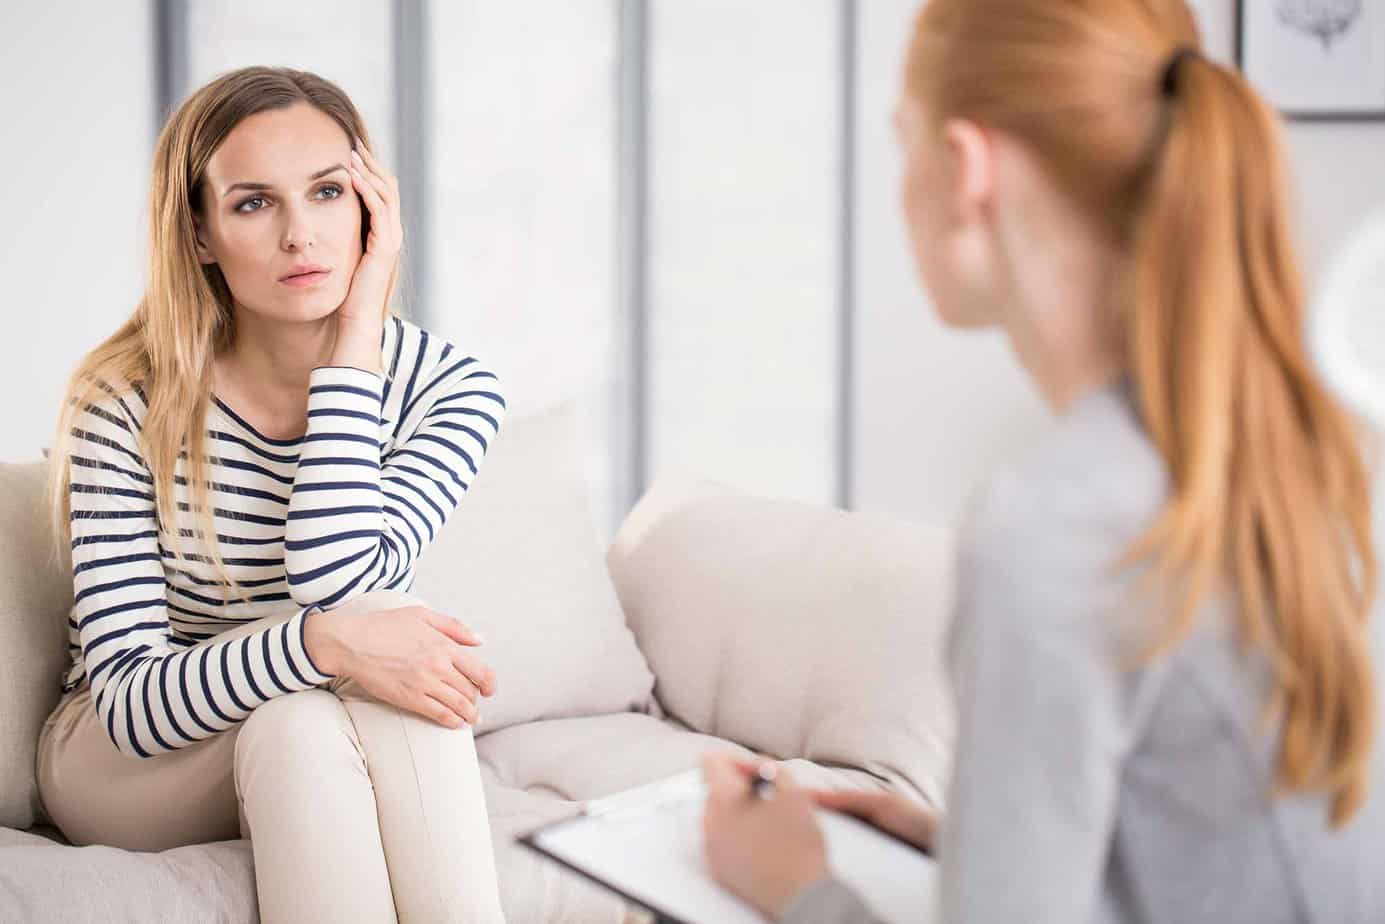 Woman in a striped shirt meeting with a psychiatrist for a psychiatric evaluation